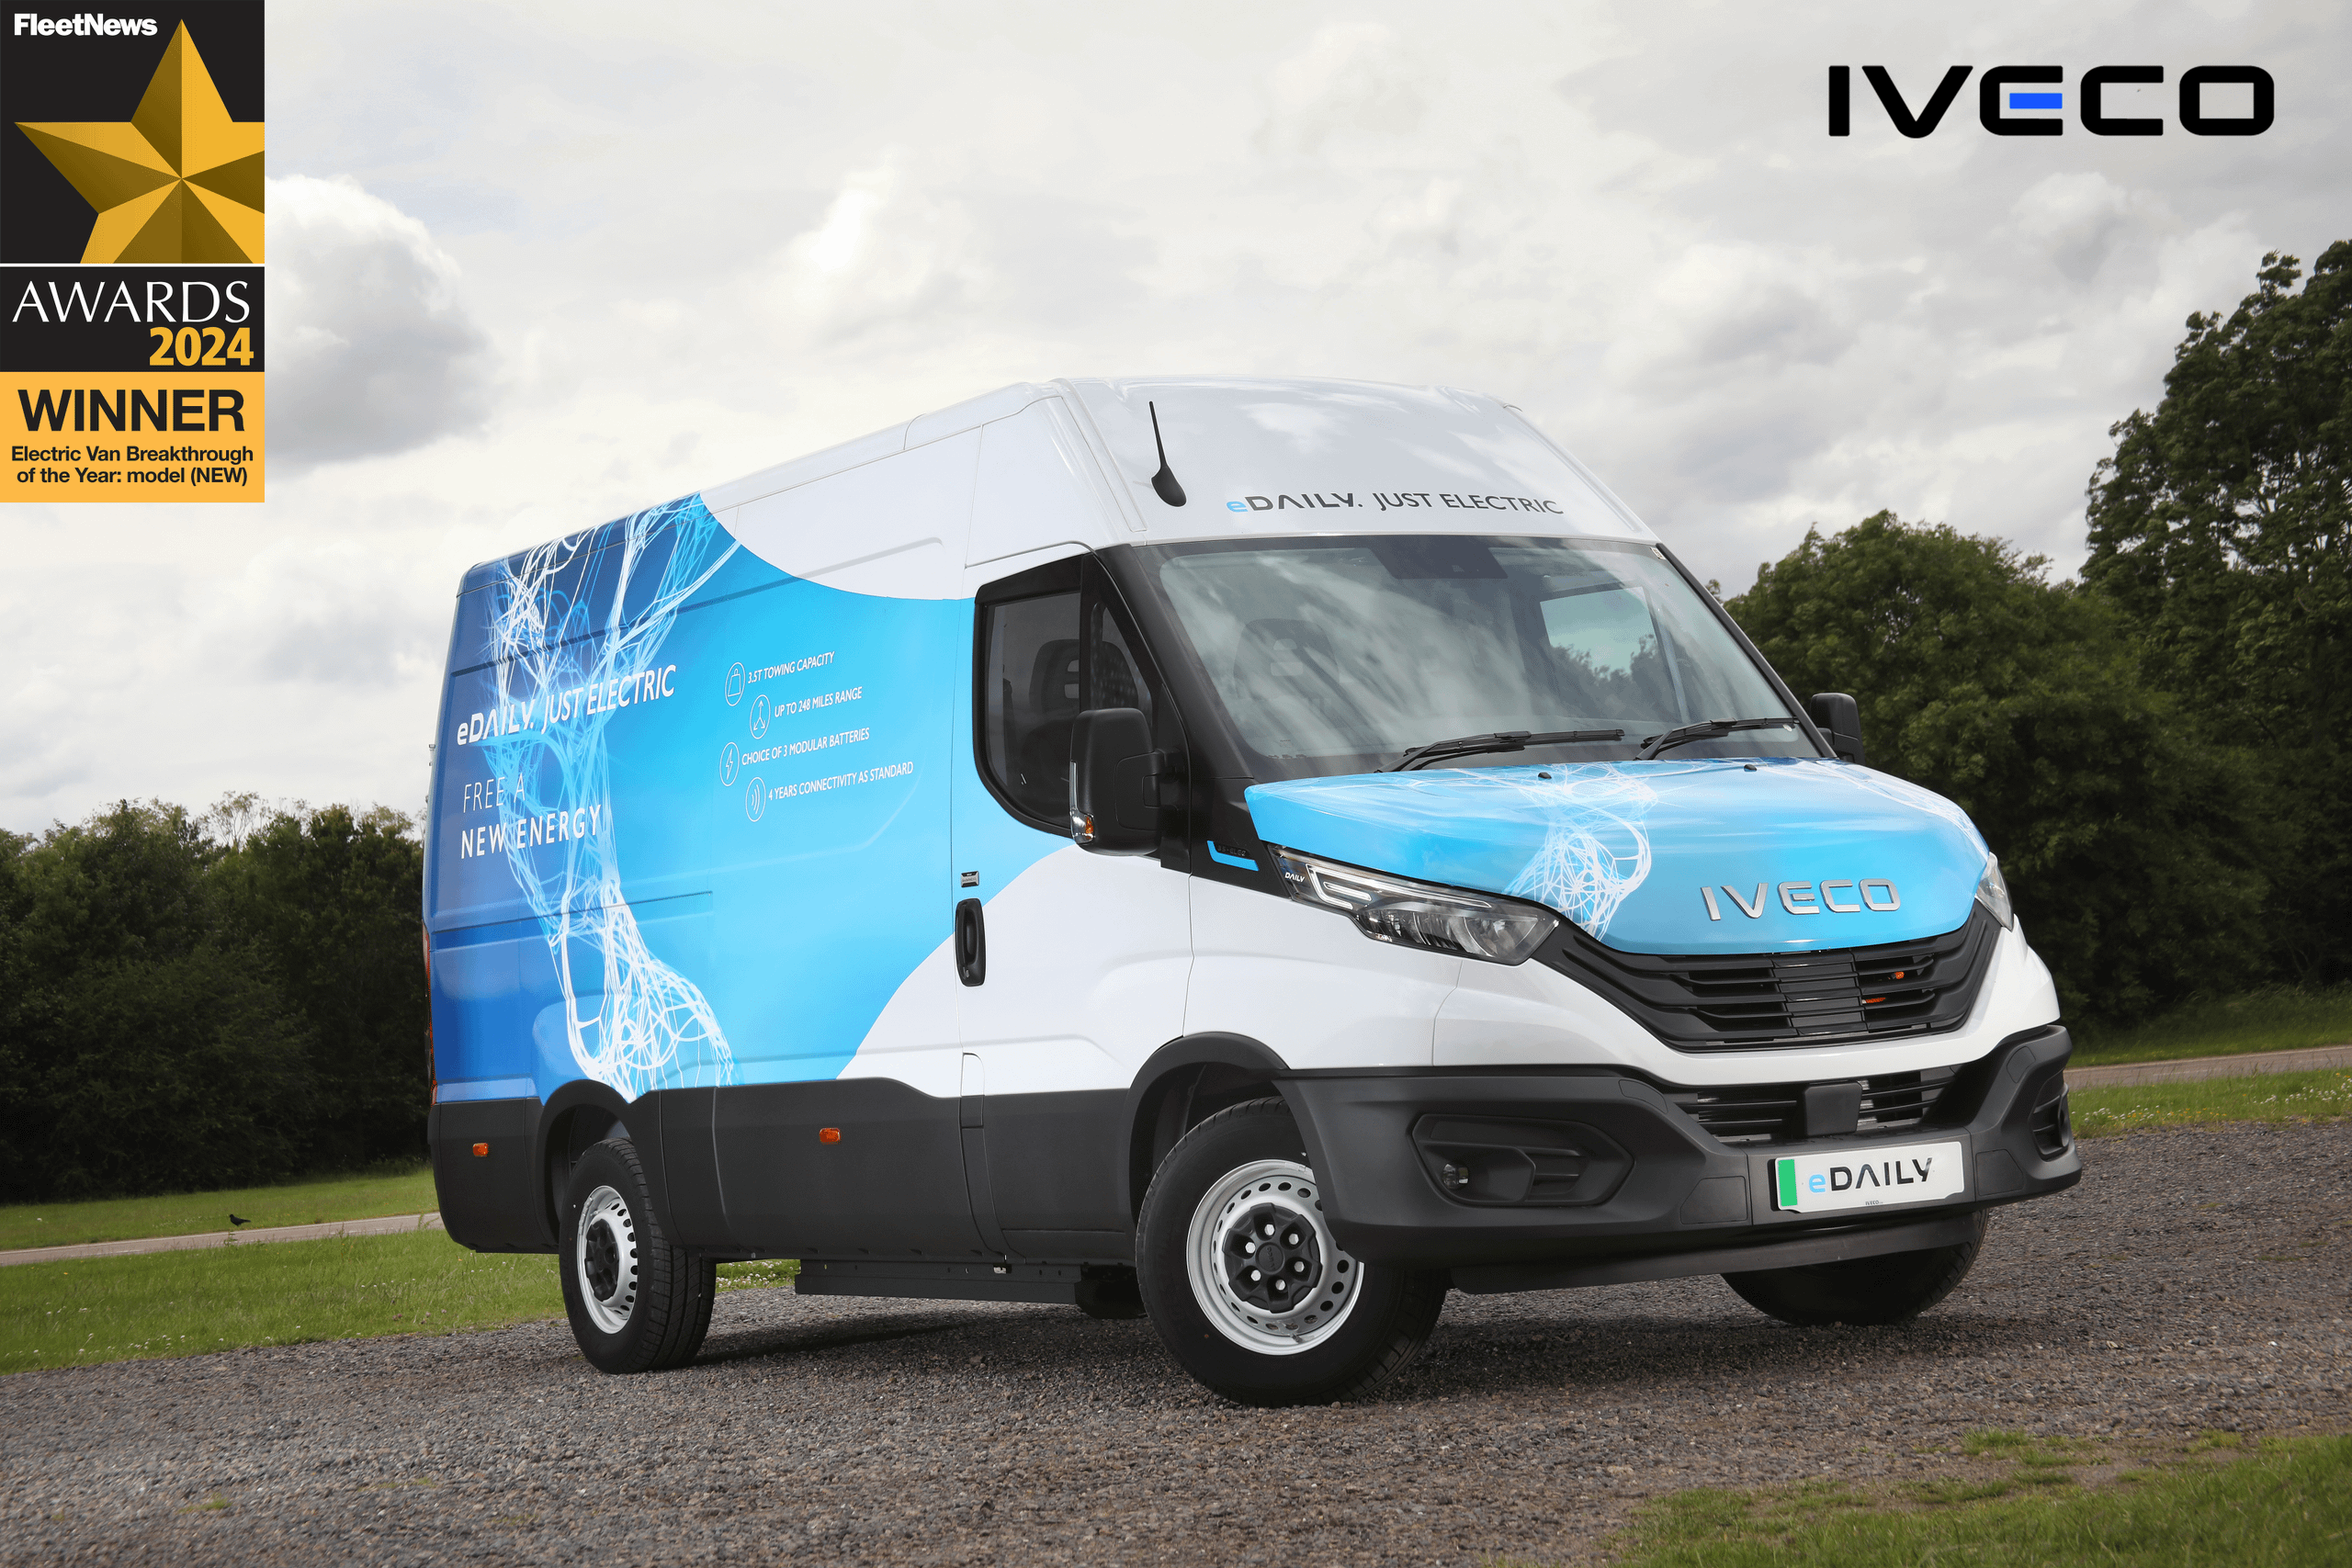 Forward-thinking IVECO eDaily wins Fleet News ‘Electric Van Breakthrough of the Year’ Award